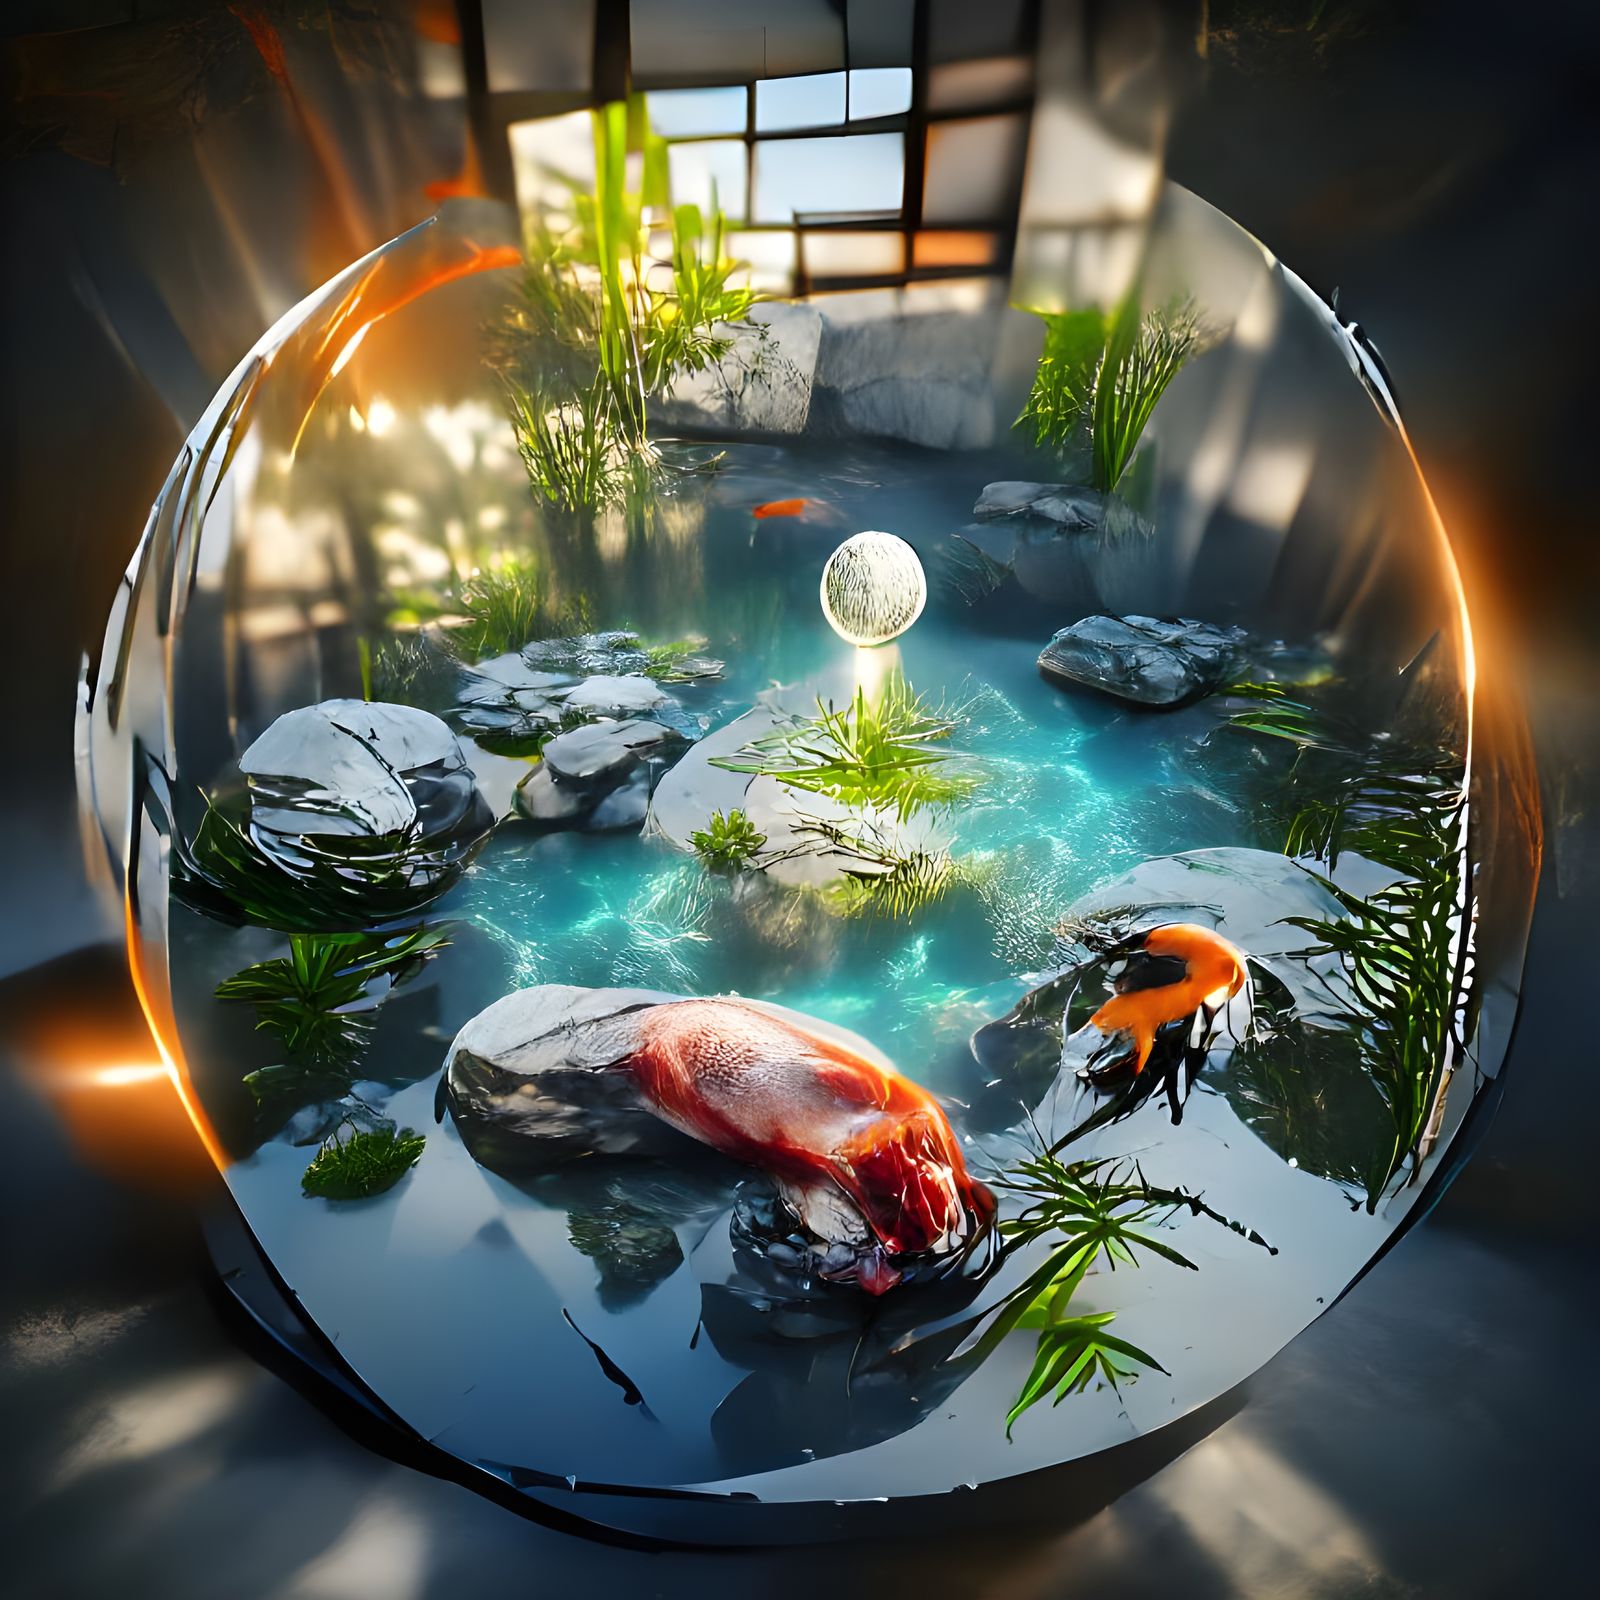 Koi Pond in a glass orb (upscaled)